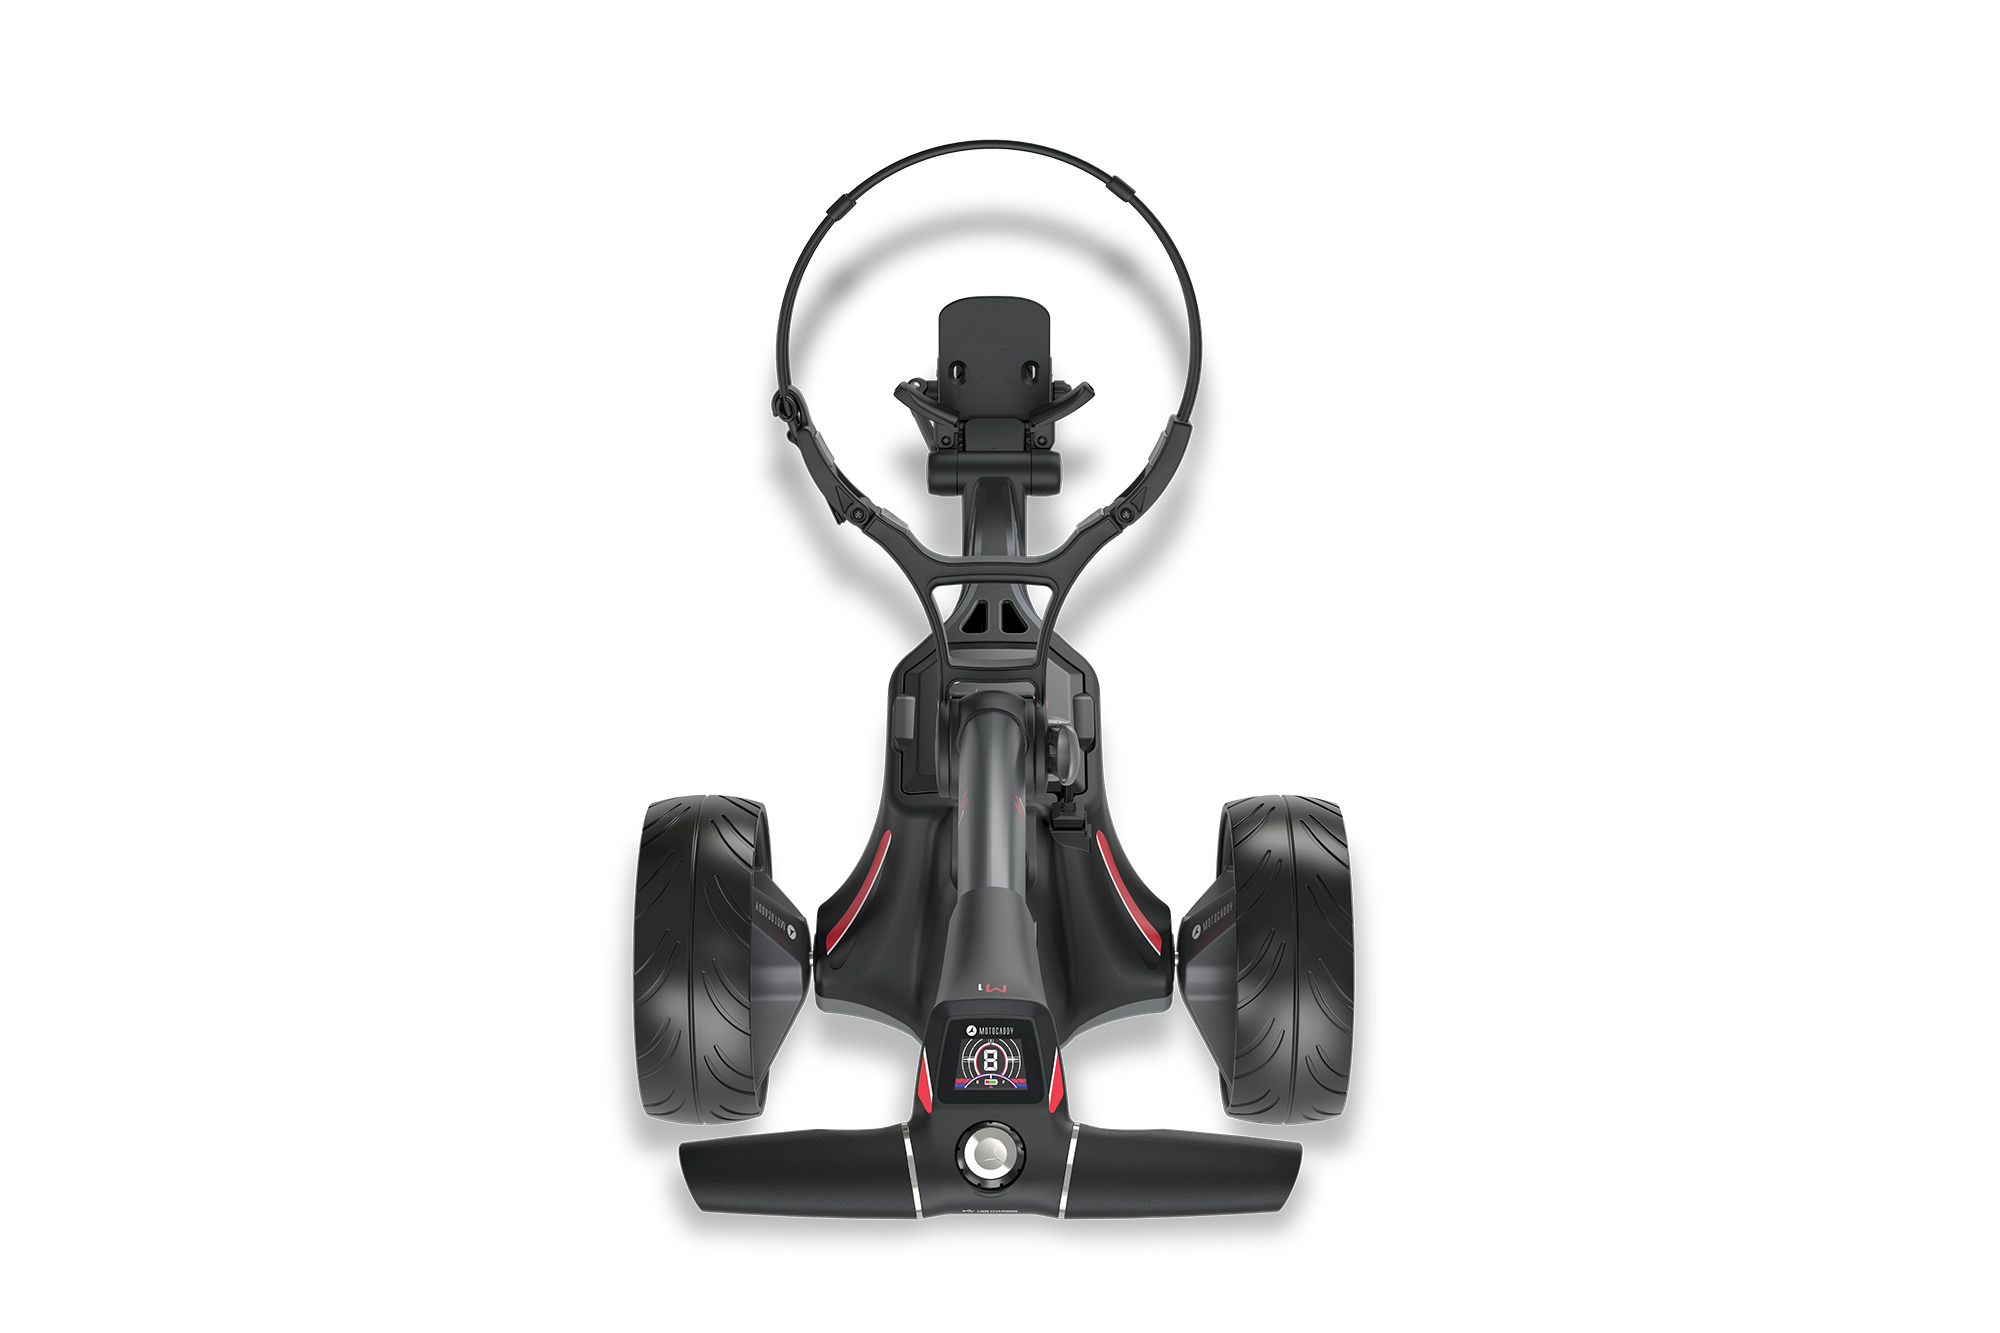 Motocaddy M1 trolley review